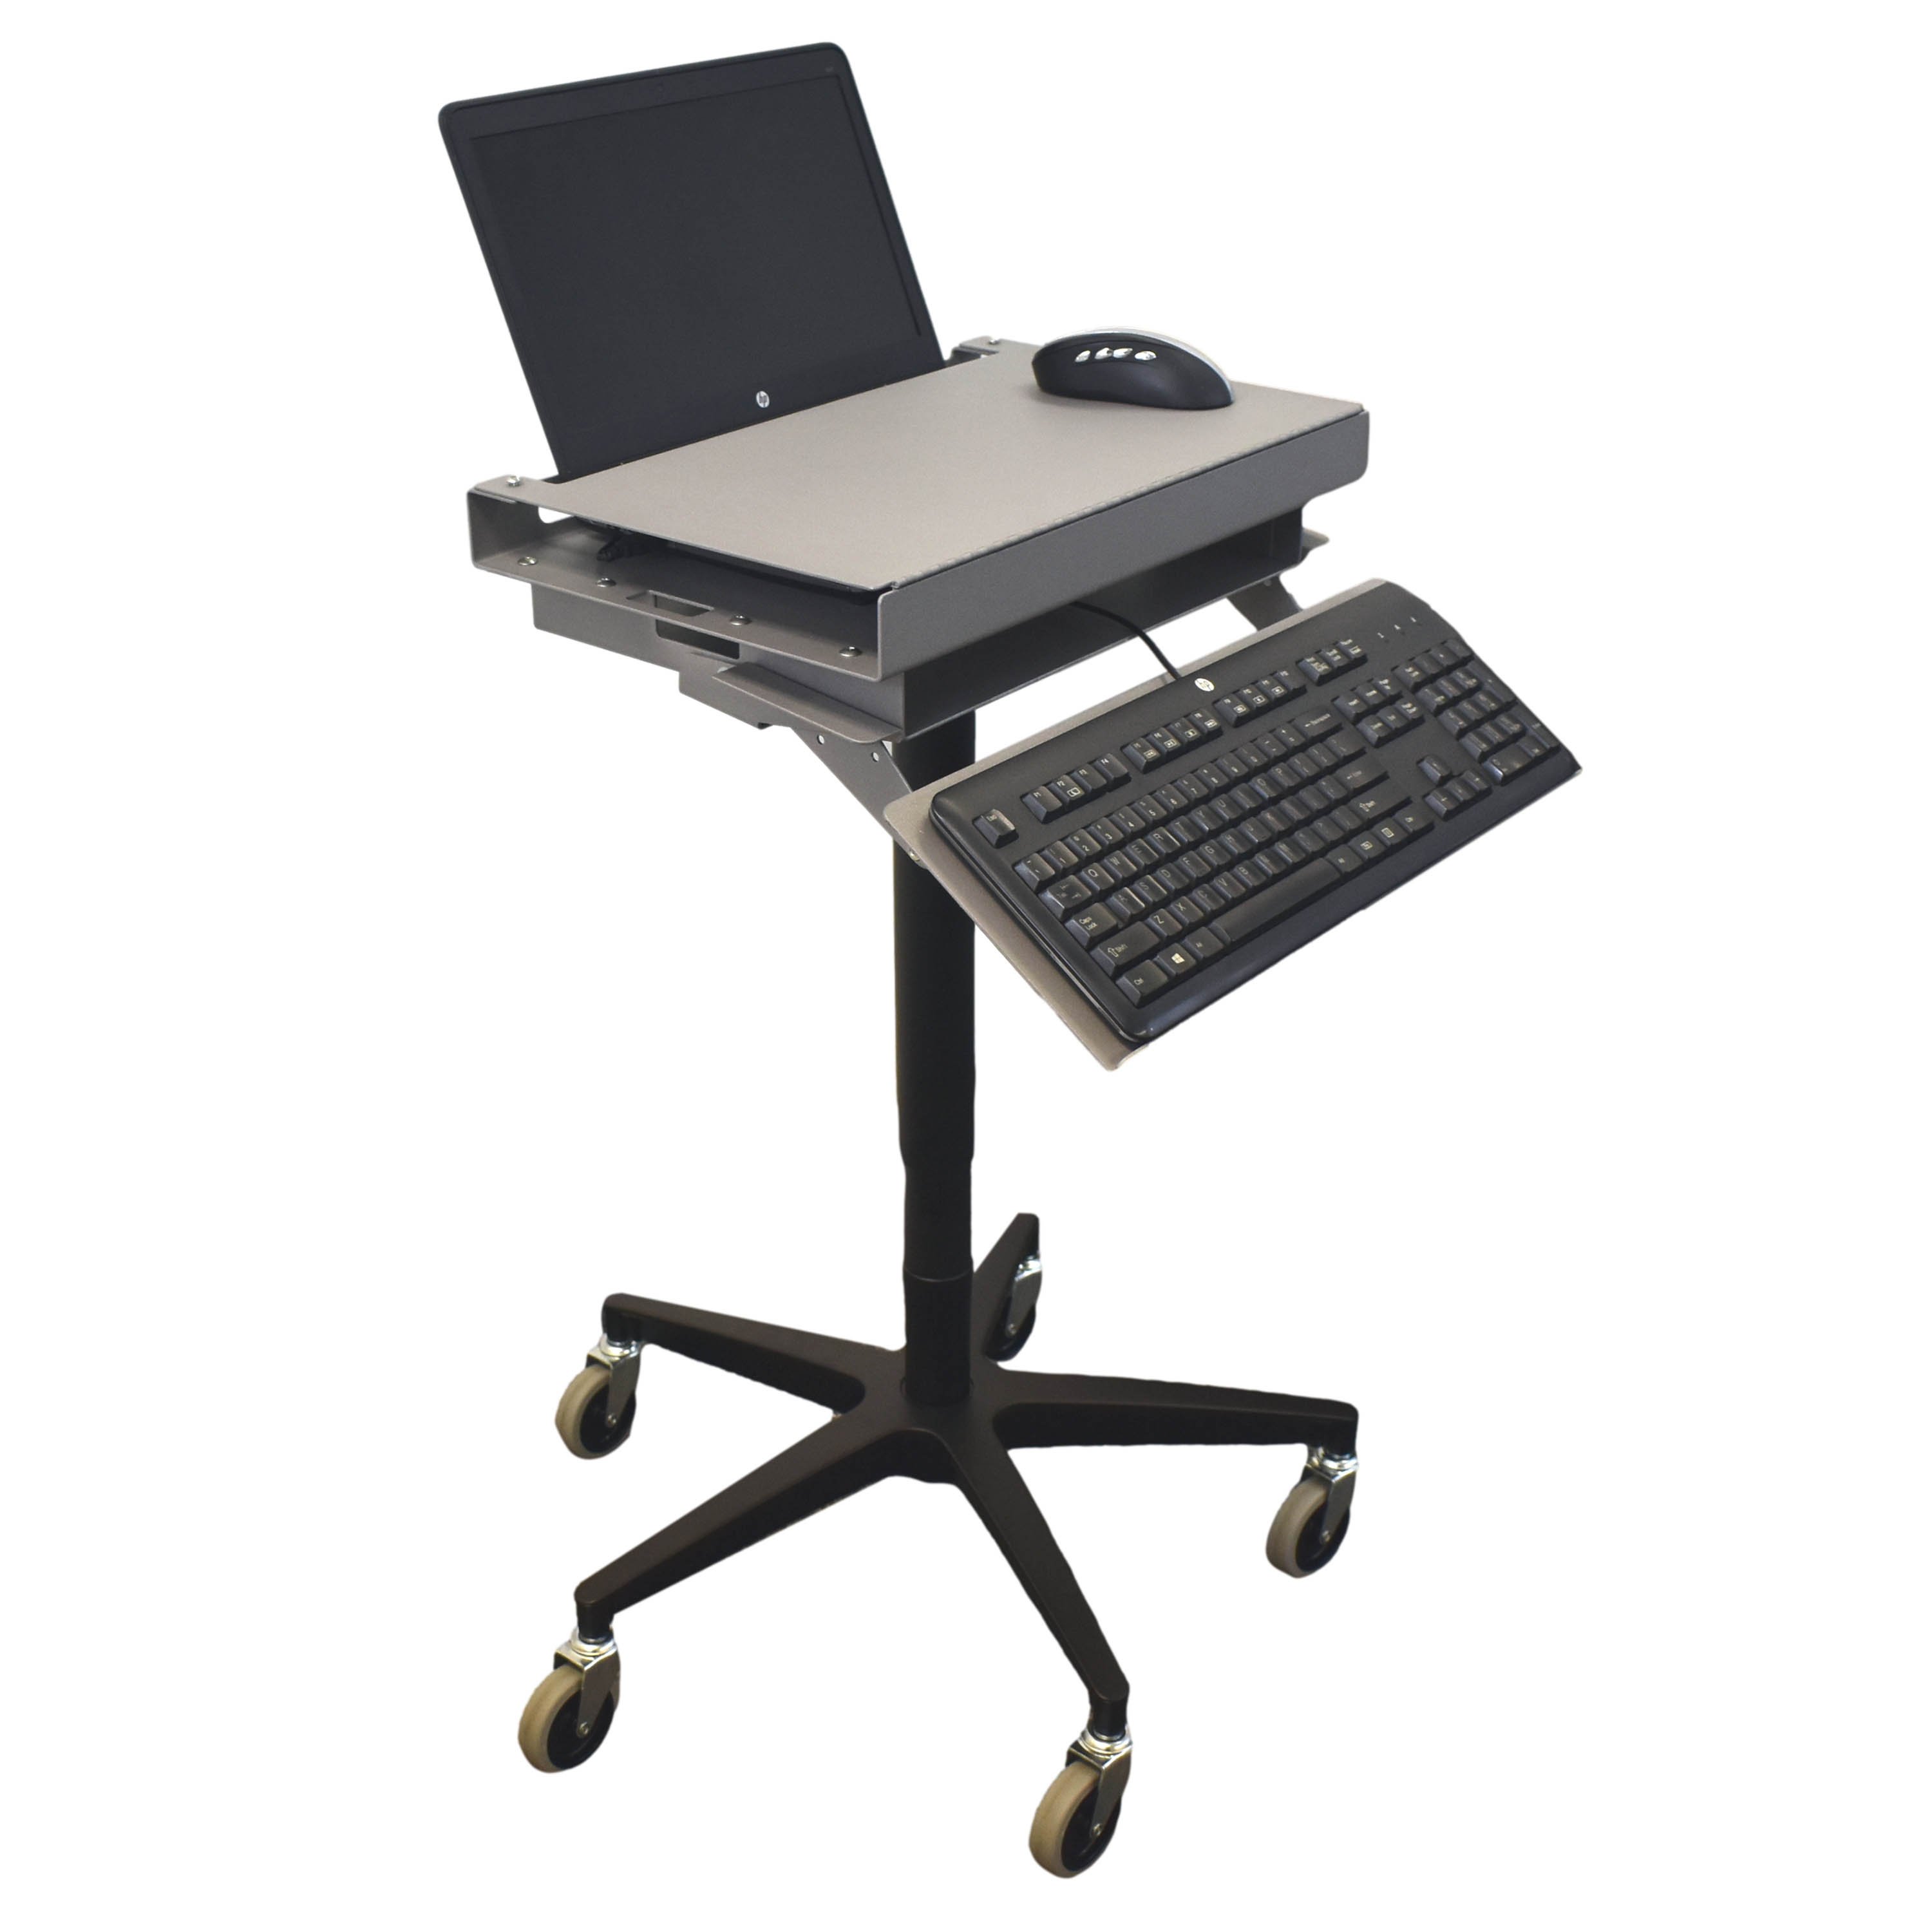 YSDSY Support Ordinateur Portable Multi-Angle Support Laptop